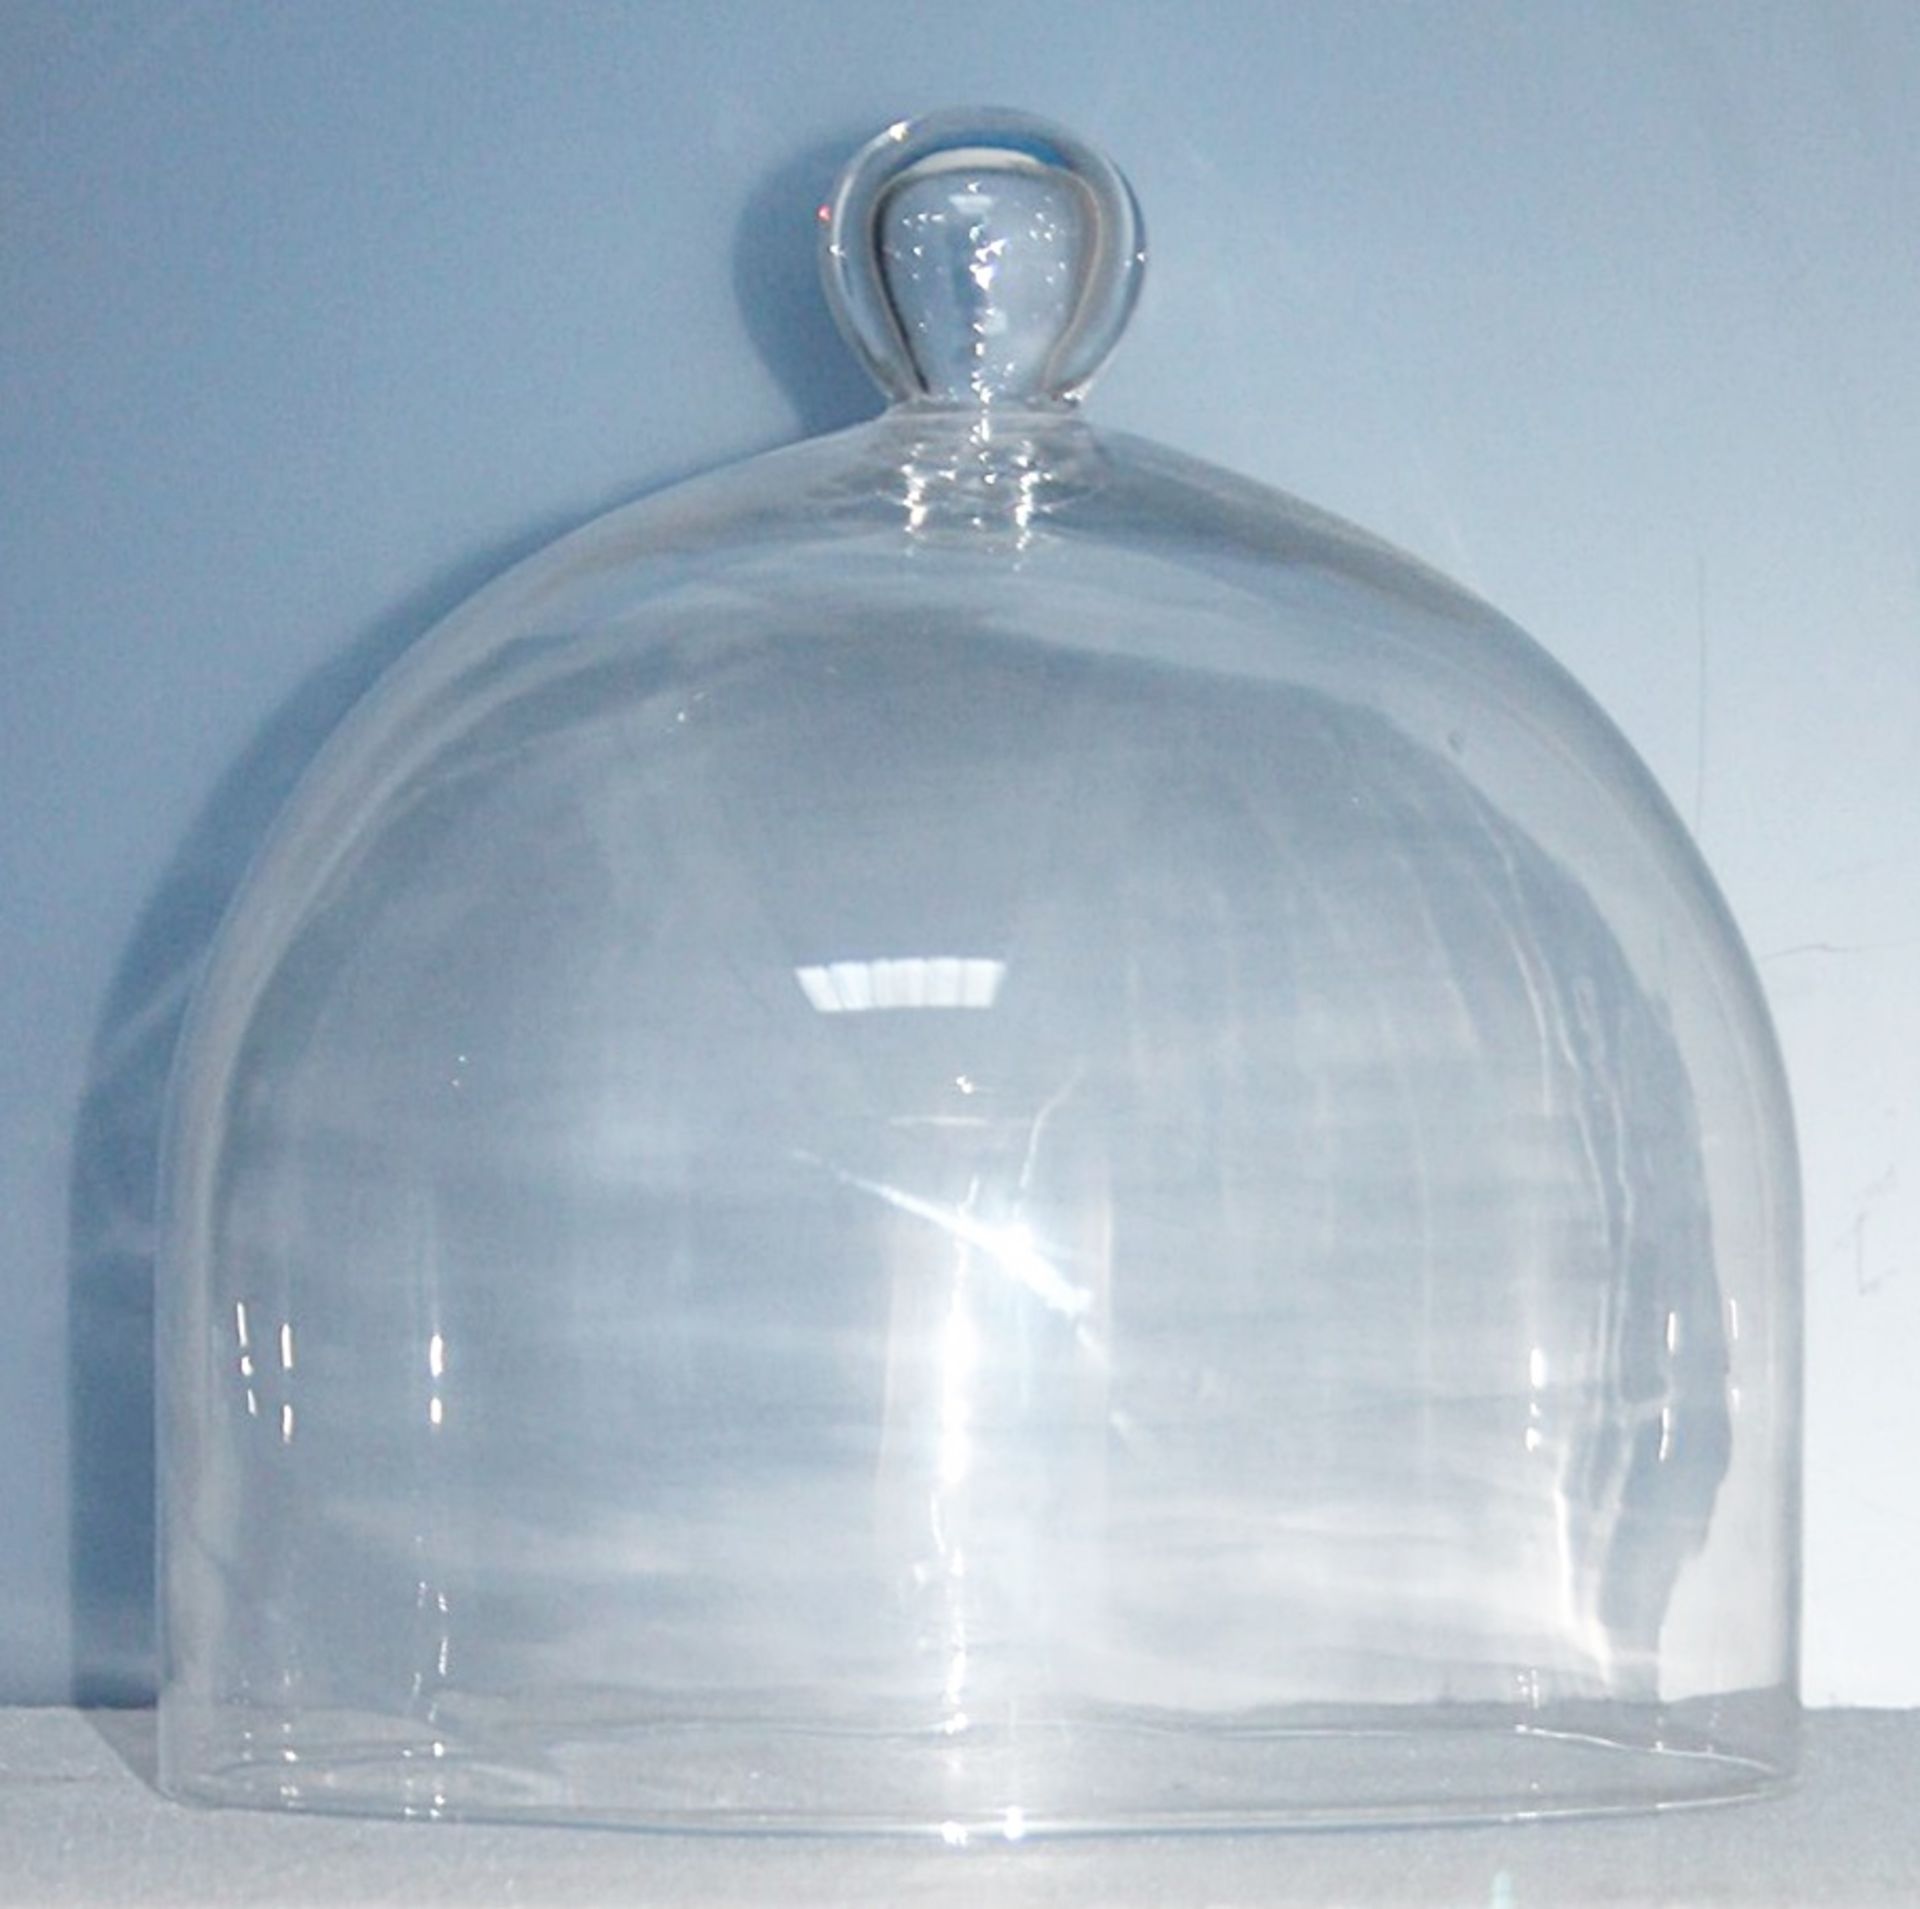 1 x Large Handblown Clear Crystal Glass Cloche Cake Dome - Recently Removed From A Well-known London